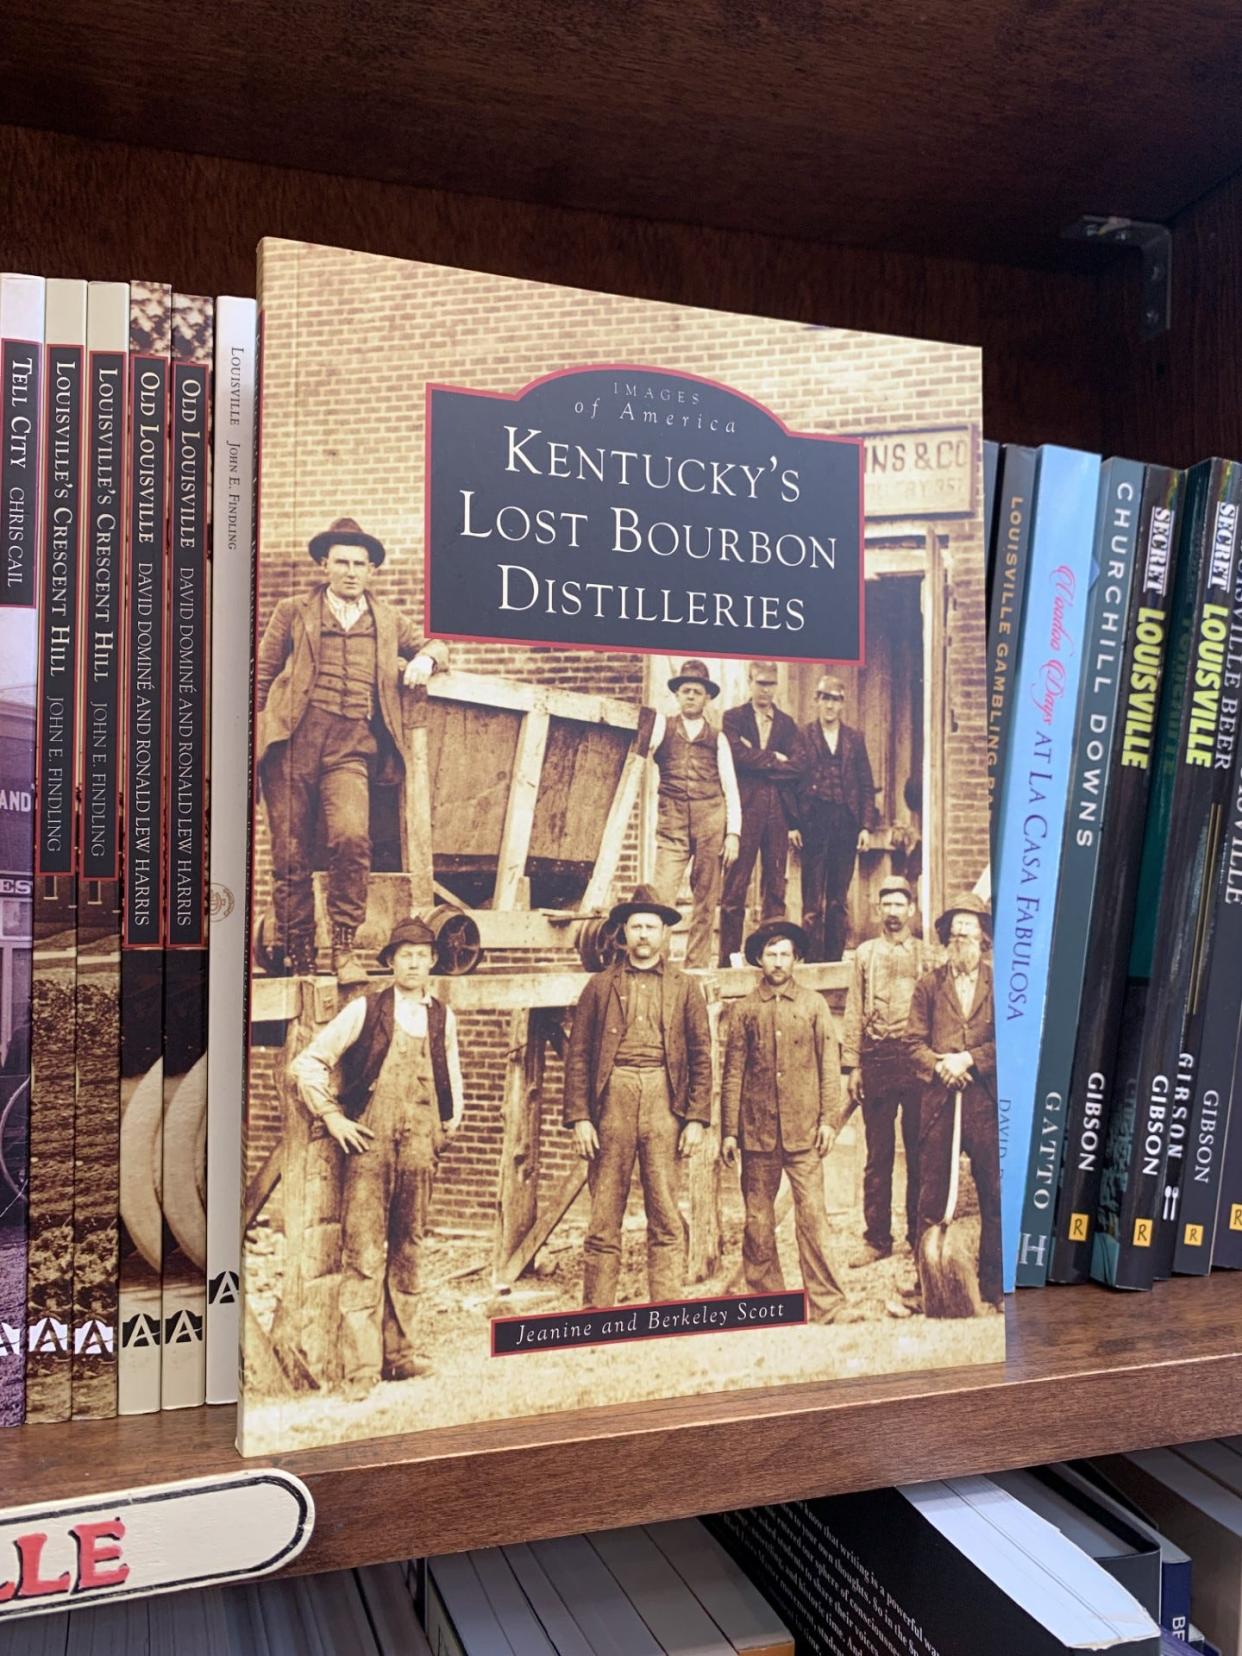 “Kentucky’s Lost Bourbon Distilleries” by husband-and-wife writers Berkeley and Jeanine Scott takes readers back a century to learn about long-ago bourbon brands.